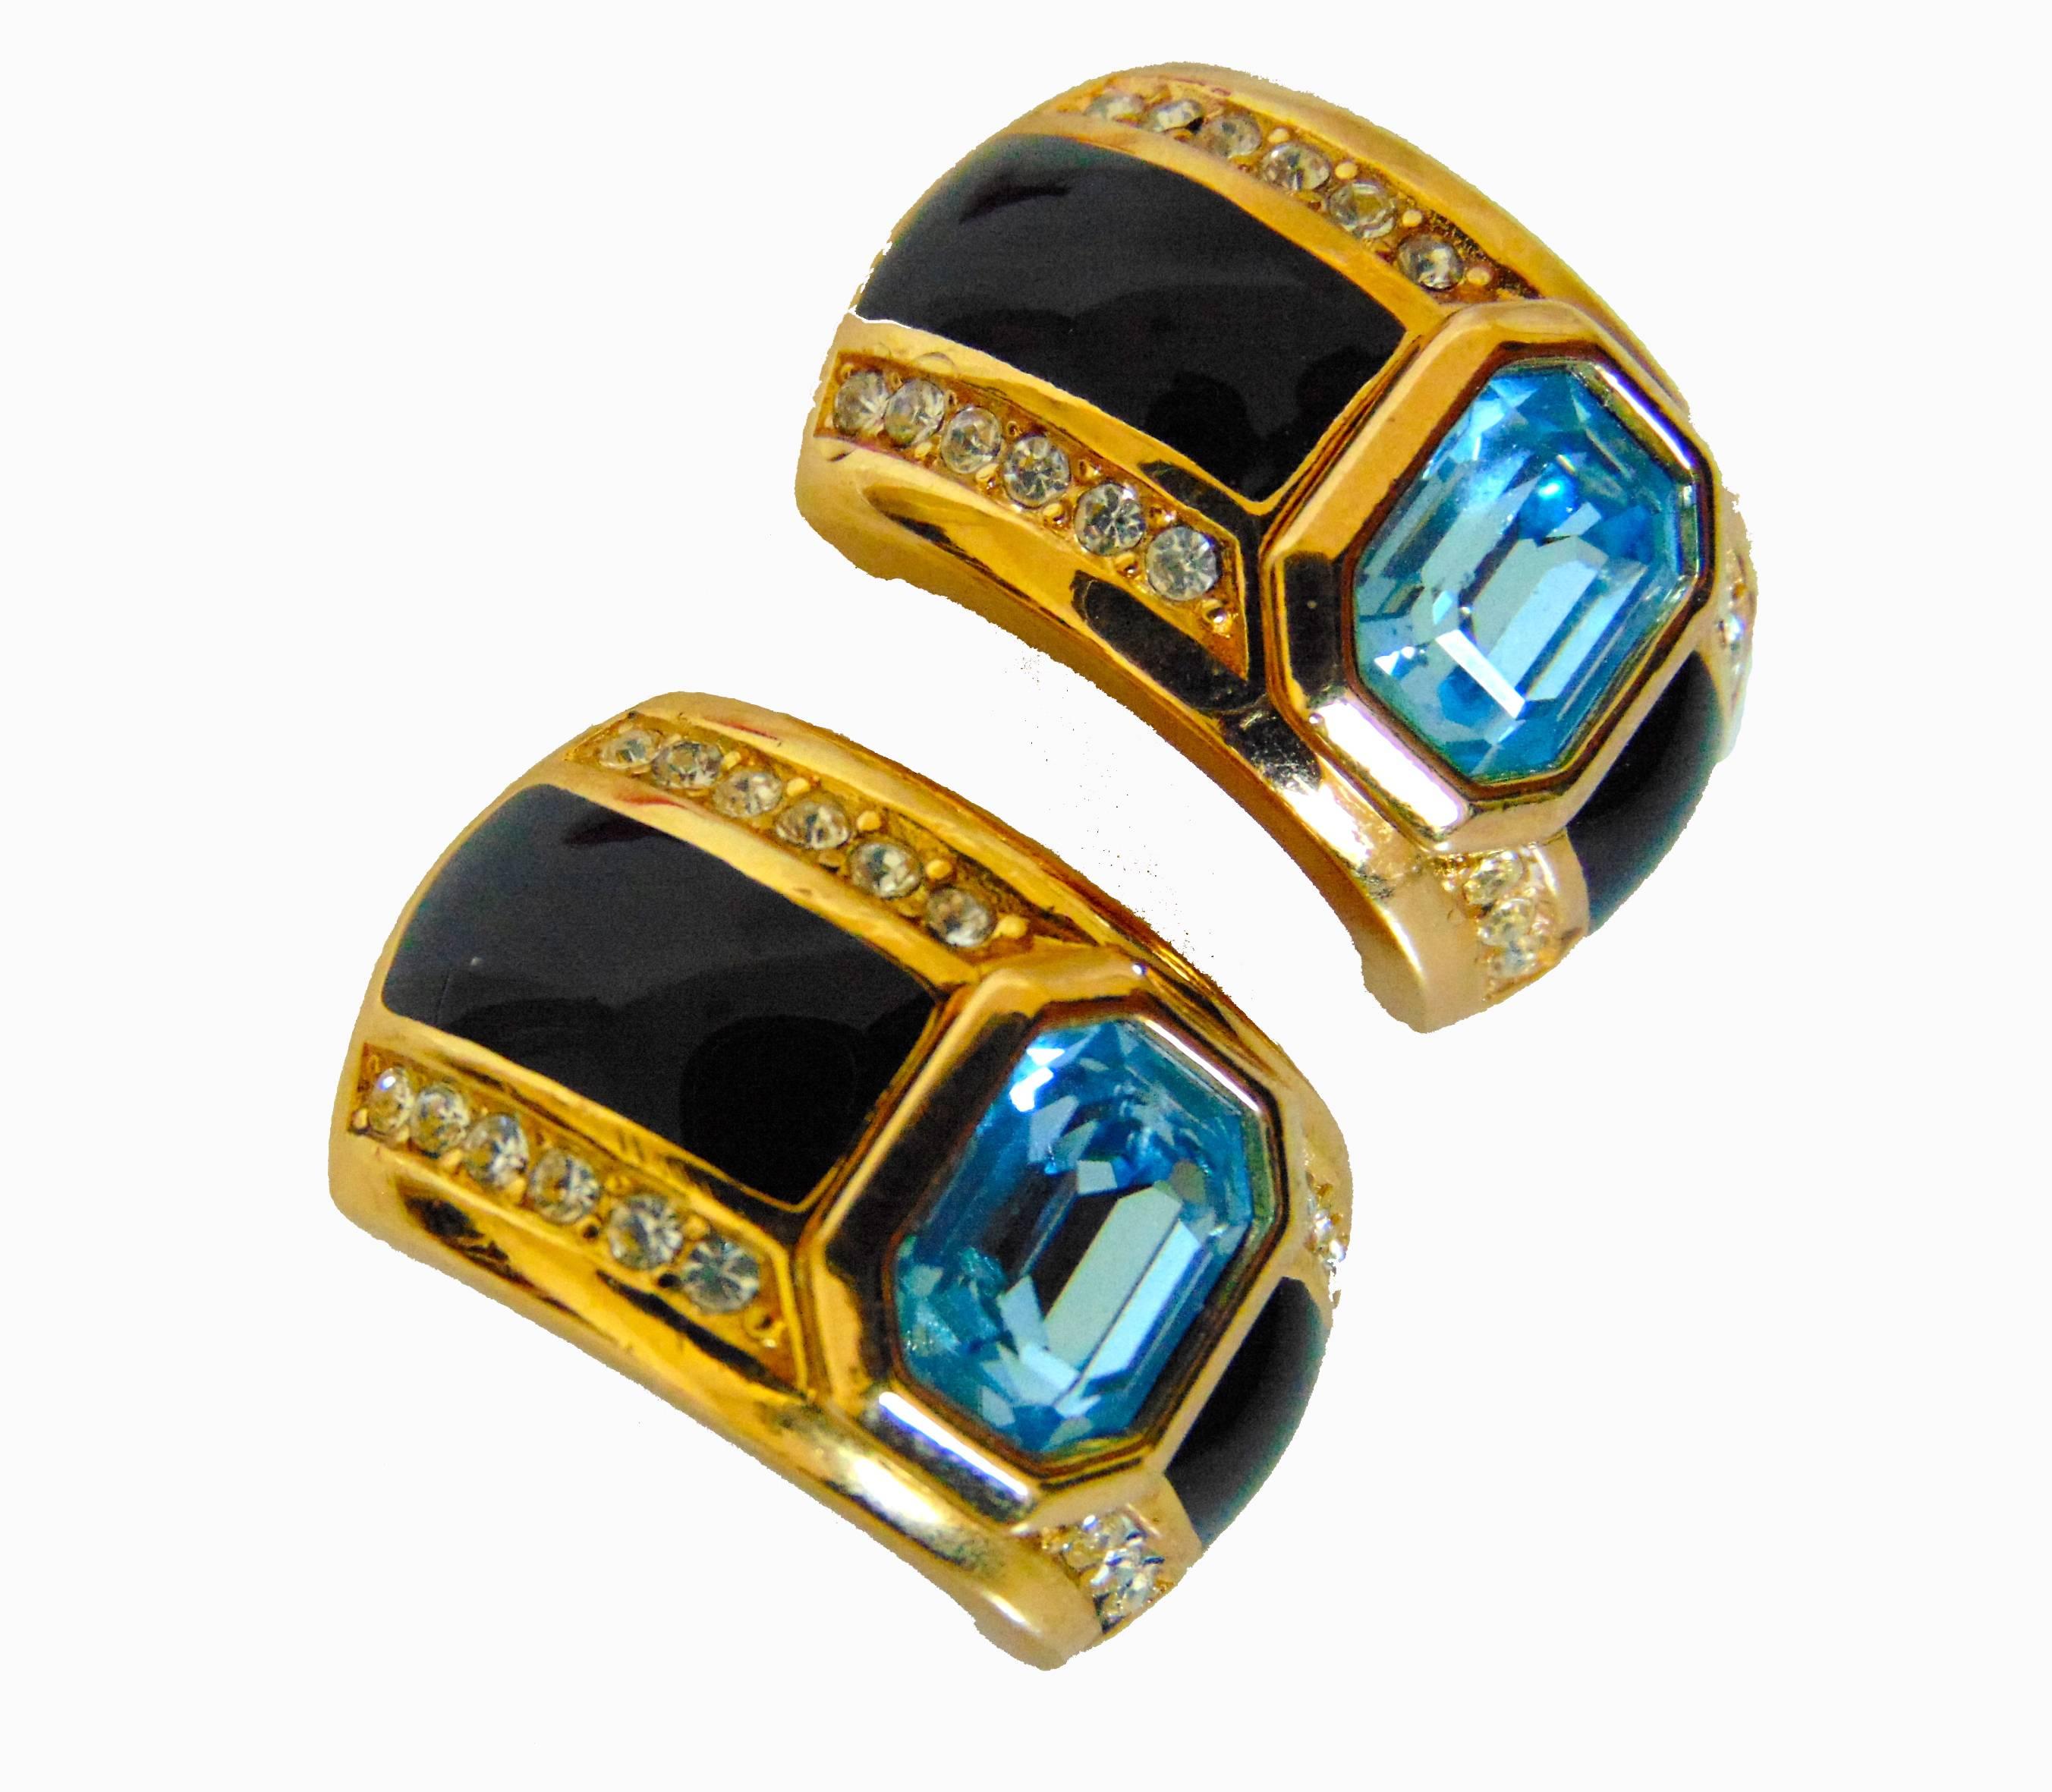 Authentic, preowned, vintage Christian Dior art deco earrings with faux sapphire topaz crystals, likely made in the 1980s.  Made from gold metal, these clip style earrings feature pretty topaz crystals in the center, with rich sapphire colored